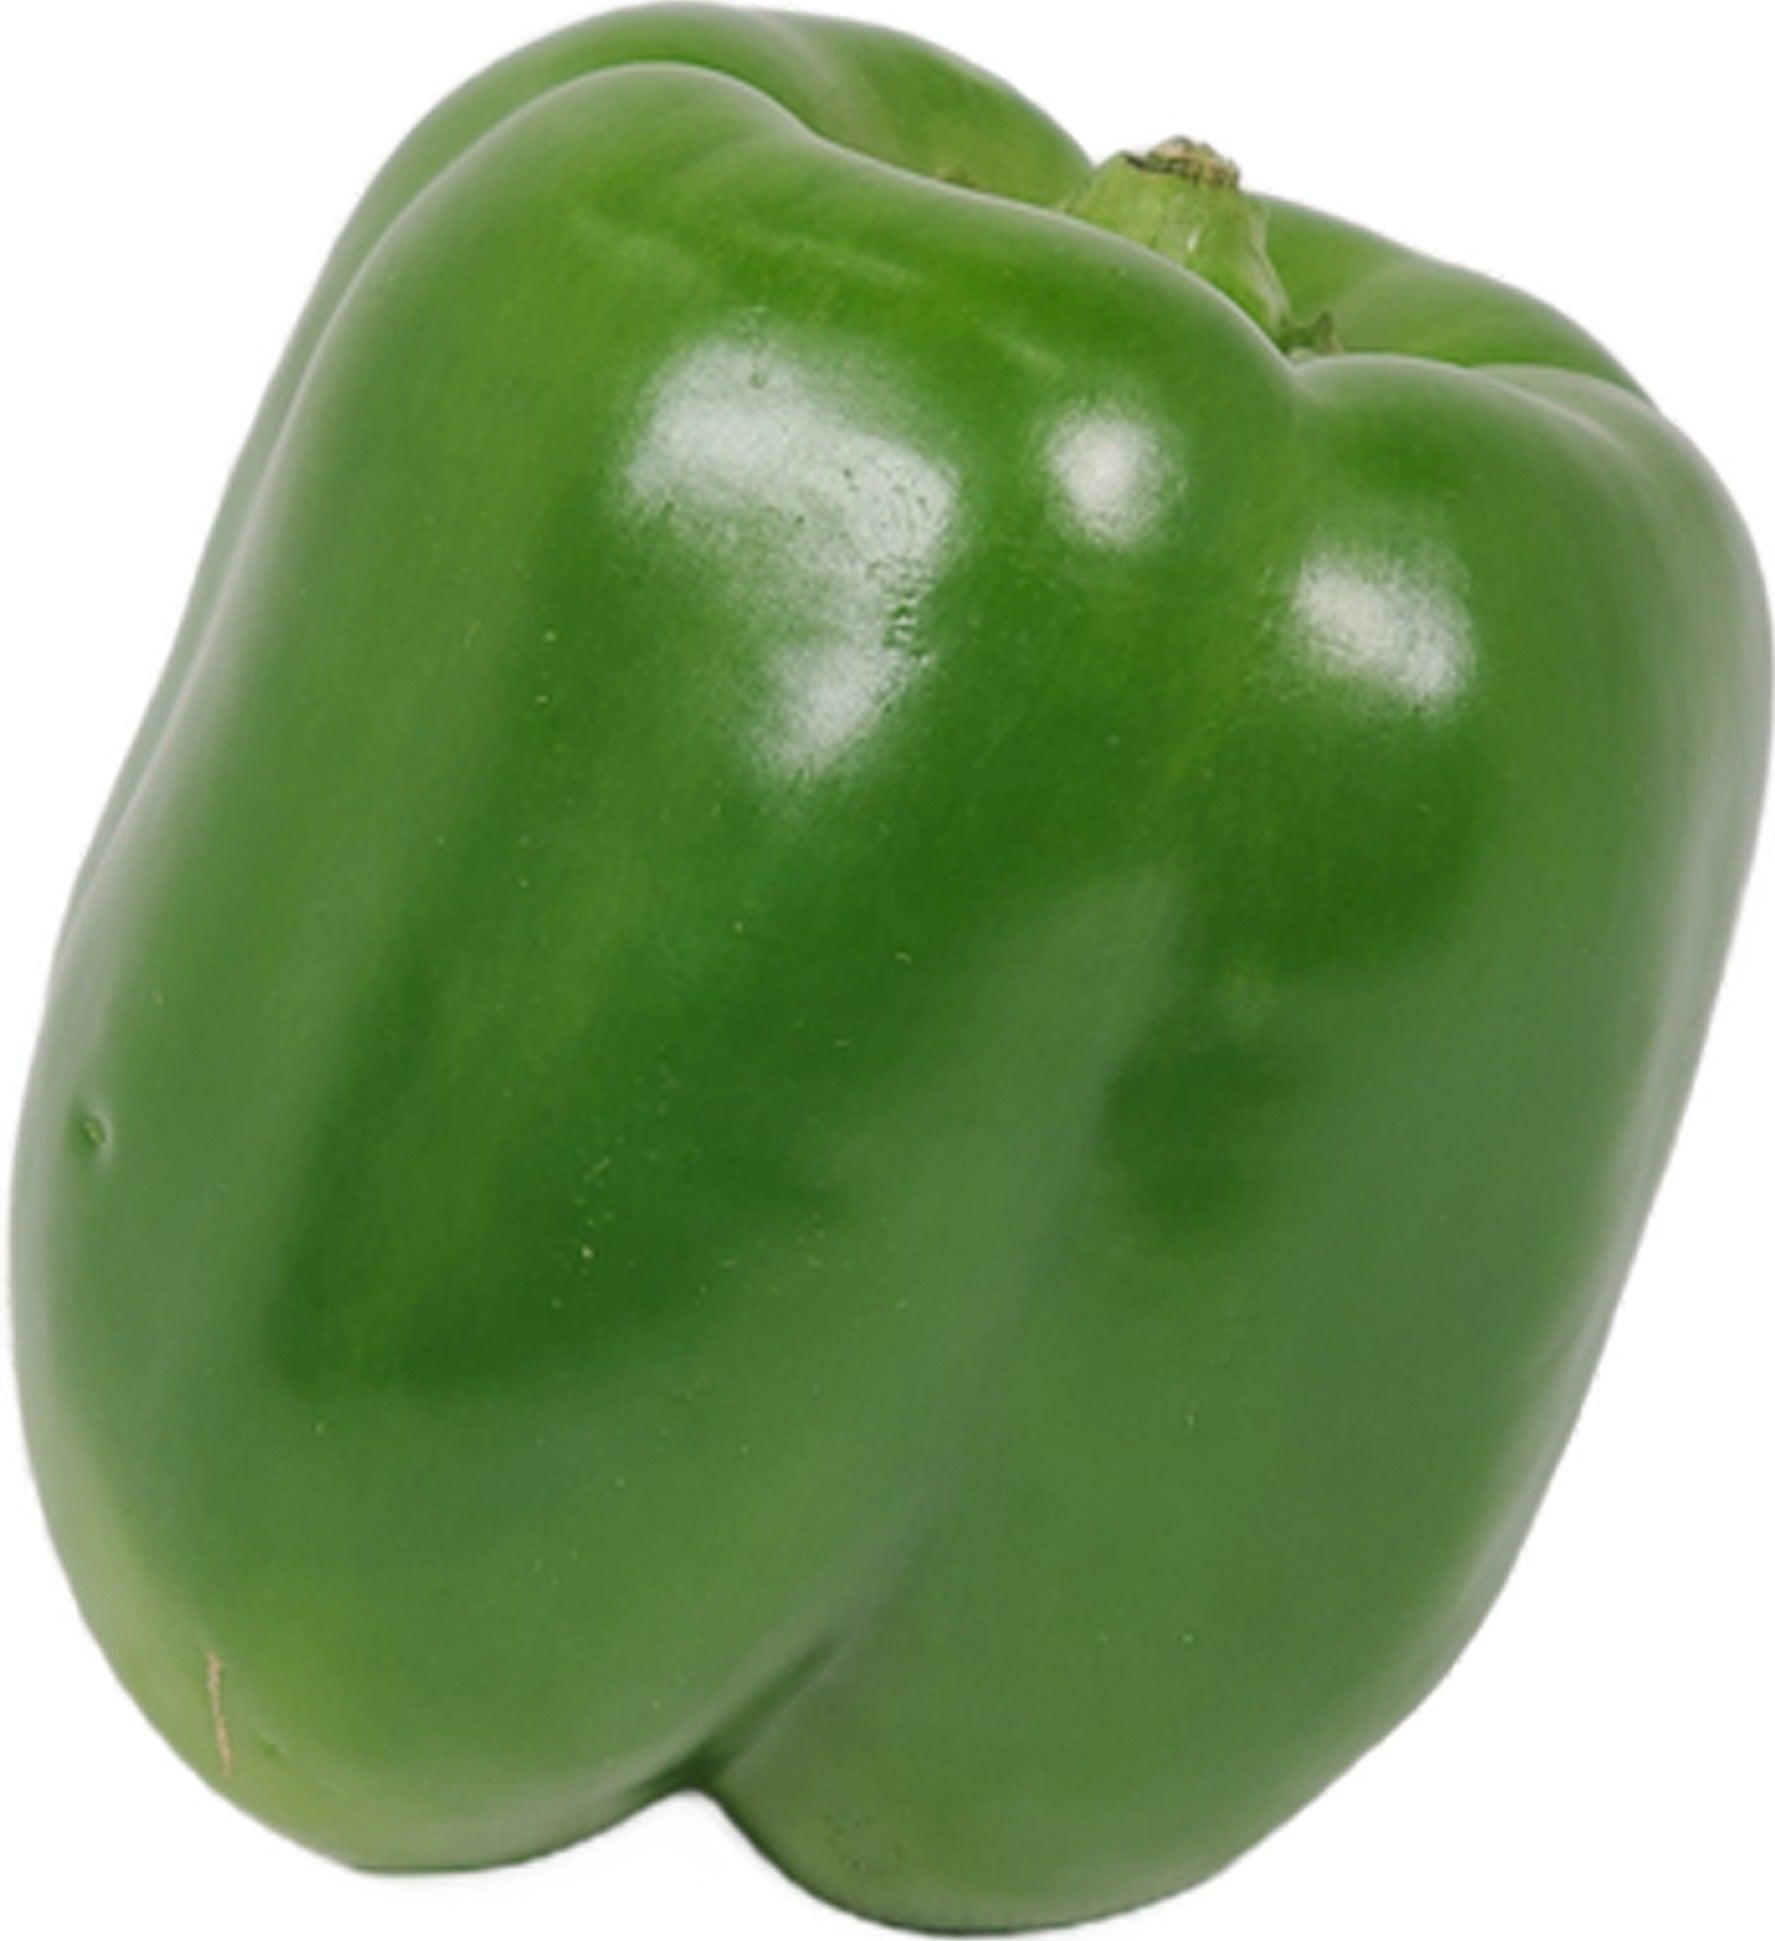 Mixed Bell Peppers, 6 ct